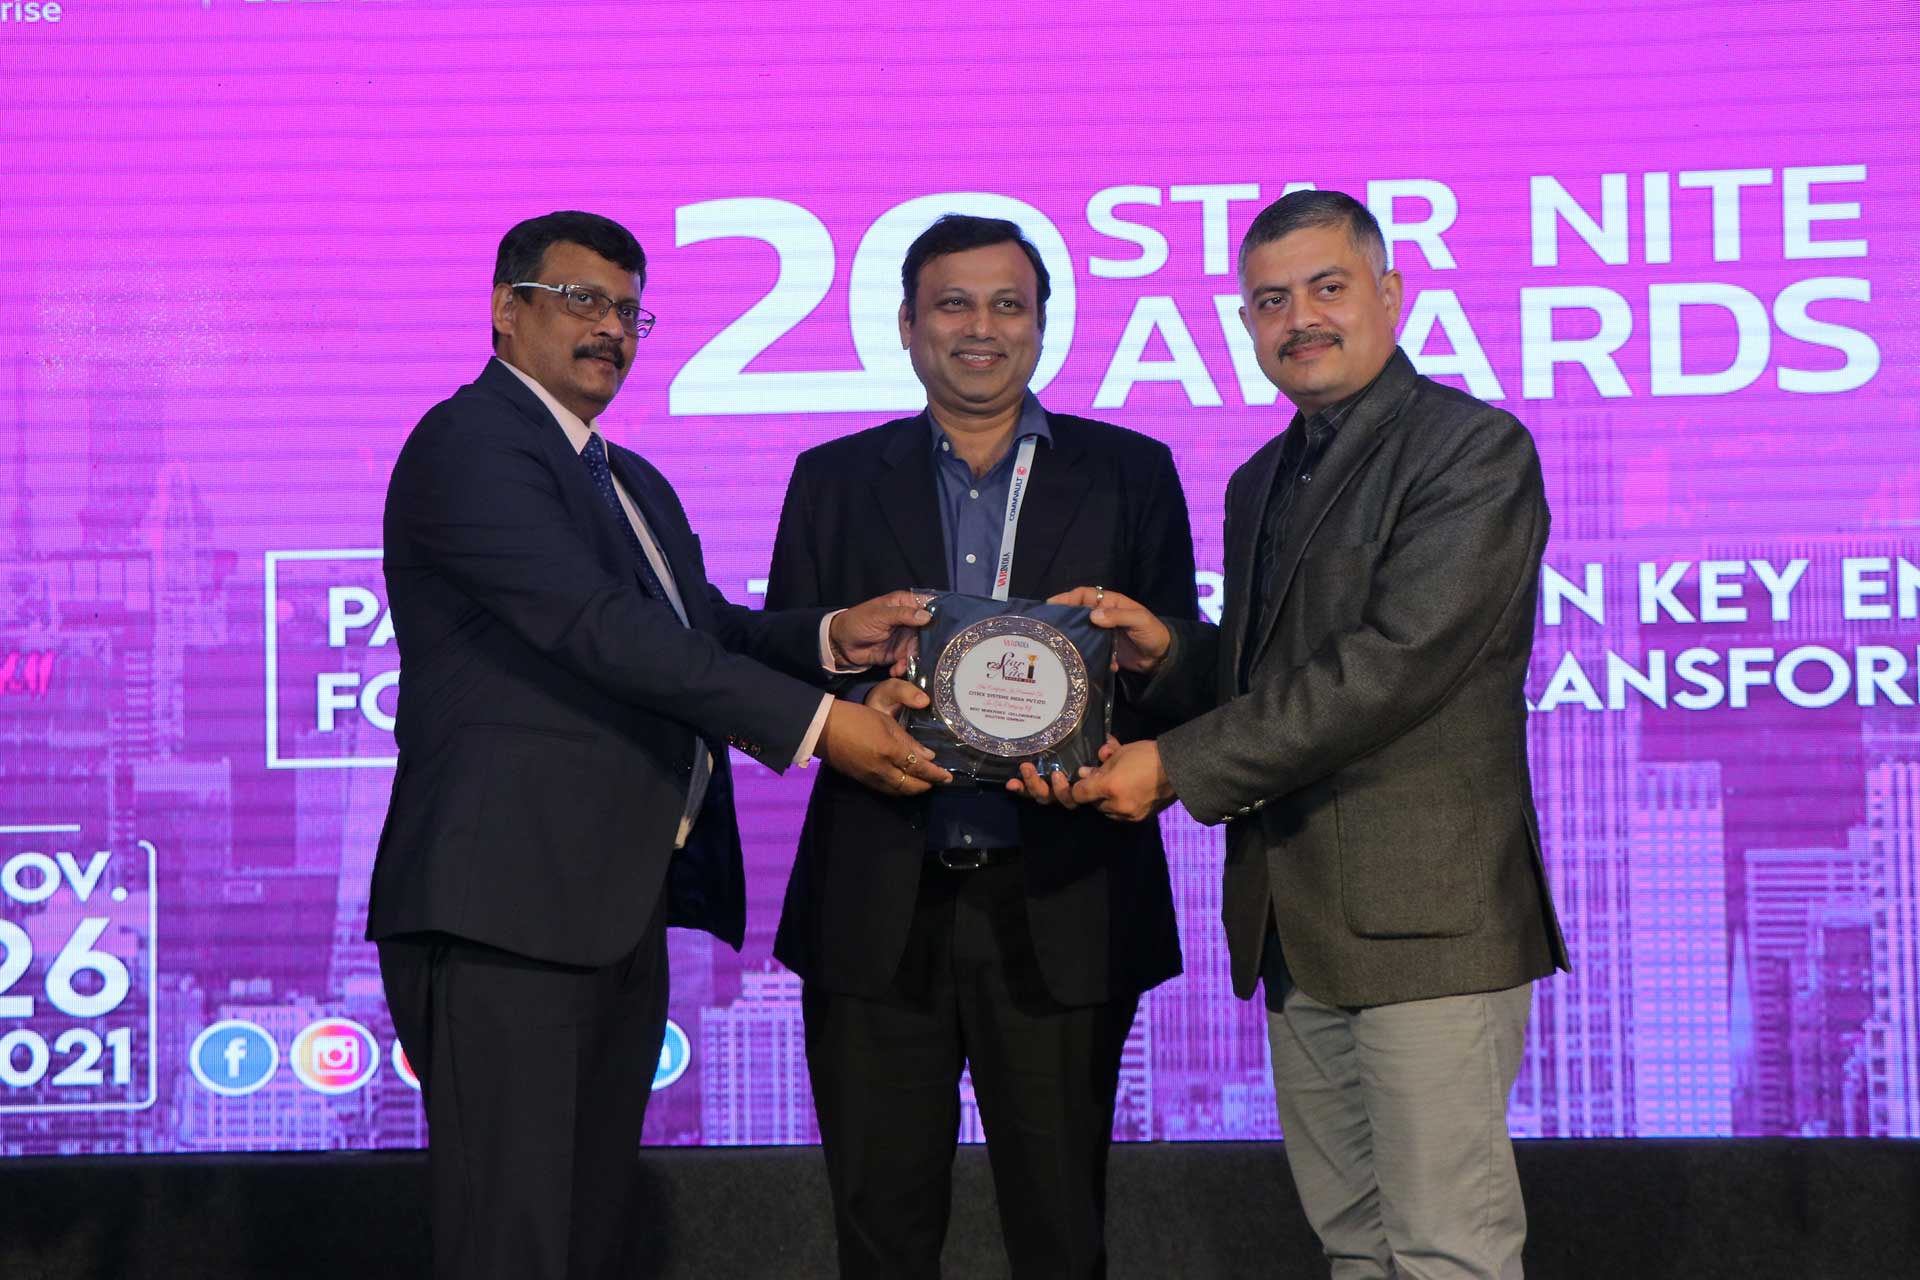 Best Work Force Collaboration Solution Company Award goes to CITRIX SYSTEMS INDIA at 20th Star Nite Awards 2021